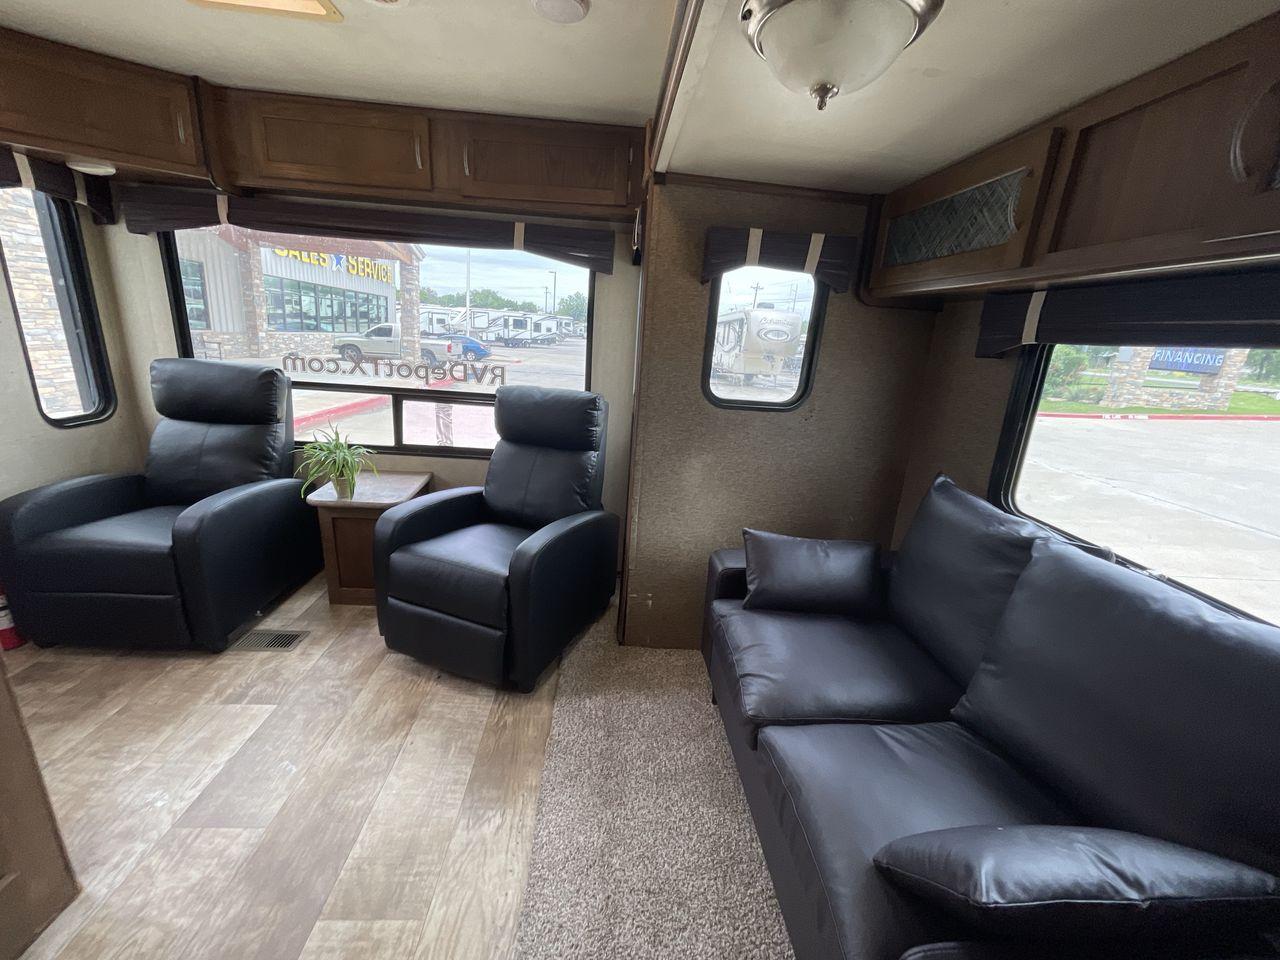 2018 GULFSTREAM TRAILMASTER 262RLS (1NL1GTP2XJ1) , Length: 31.25 ft. | Dry Weight: 6,849 lbs. | Slides: 1 transmission, located at 4319 N Main Street, Cleburne, TX, 76033, (817) 221-0660, 32.435829, -97.384178 - This 2018 Gulf Stream Trailmaster 262RLS travel trailer measures just over 31' in length. It is a dual axle, steel wheel setup with a dry weight of 6,849 lbs and a carrying capacity of 1,421 lbs. With a dry weight of 6,849 lbs., the Trailmaster 262RLS offers easy maneuverability without compromising - Photo #12